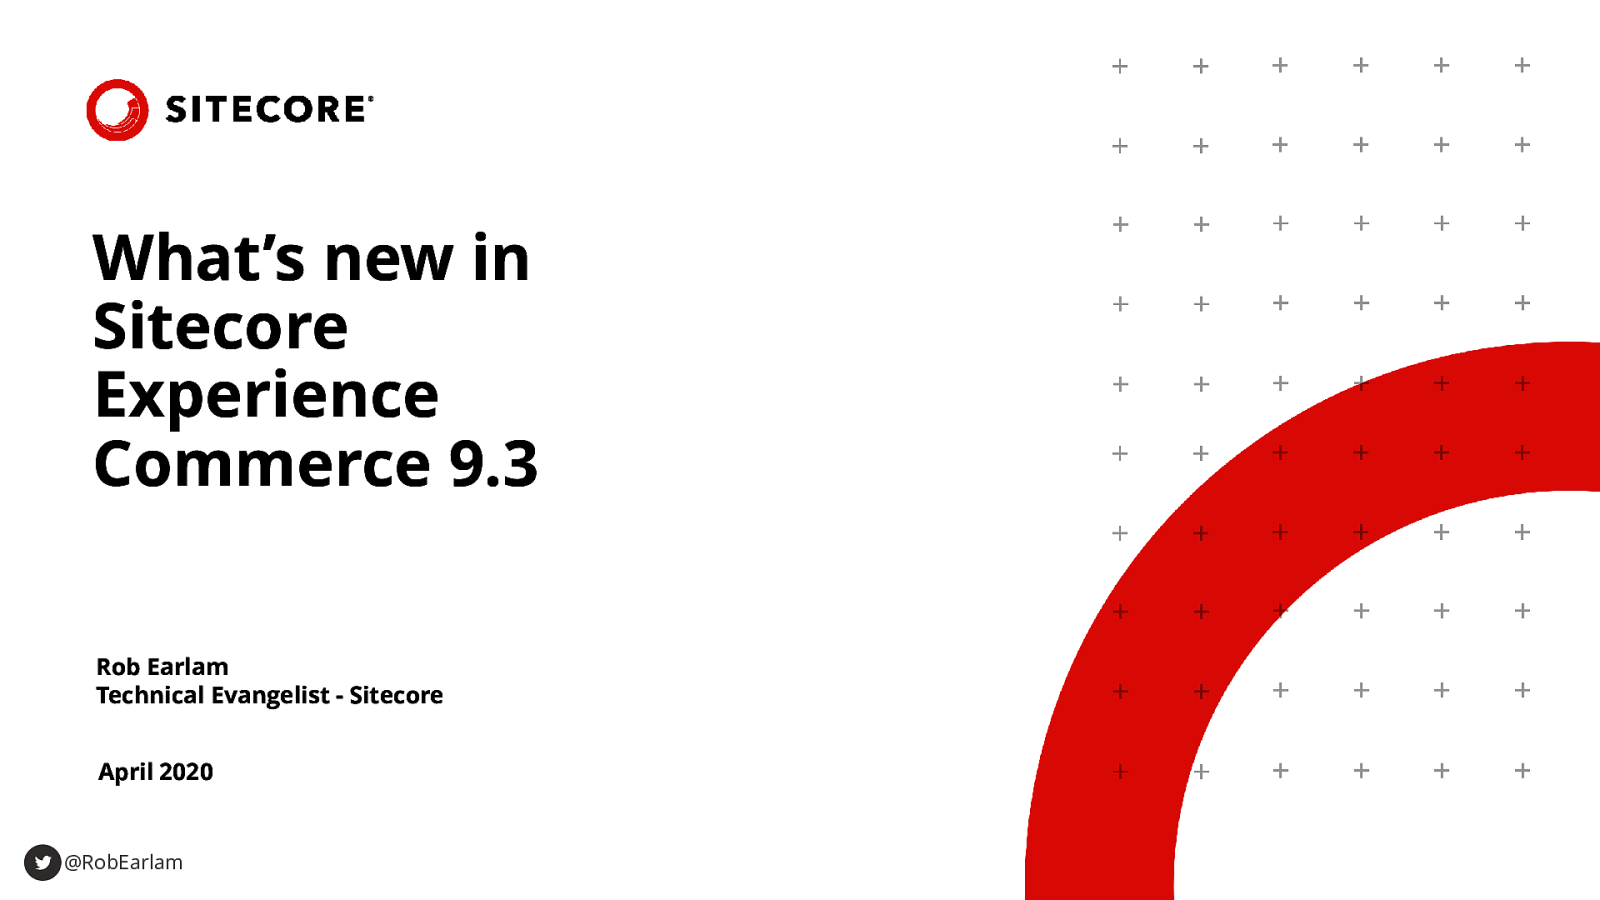 What’s new in Sitecore Experience Commerce 9.3?